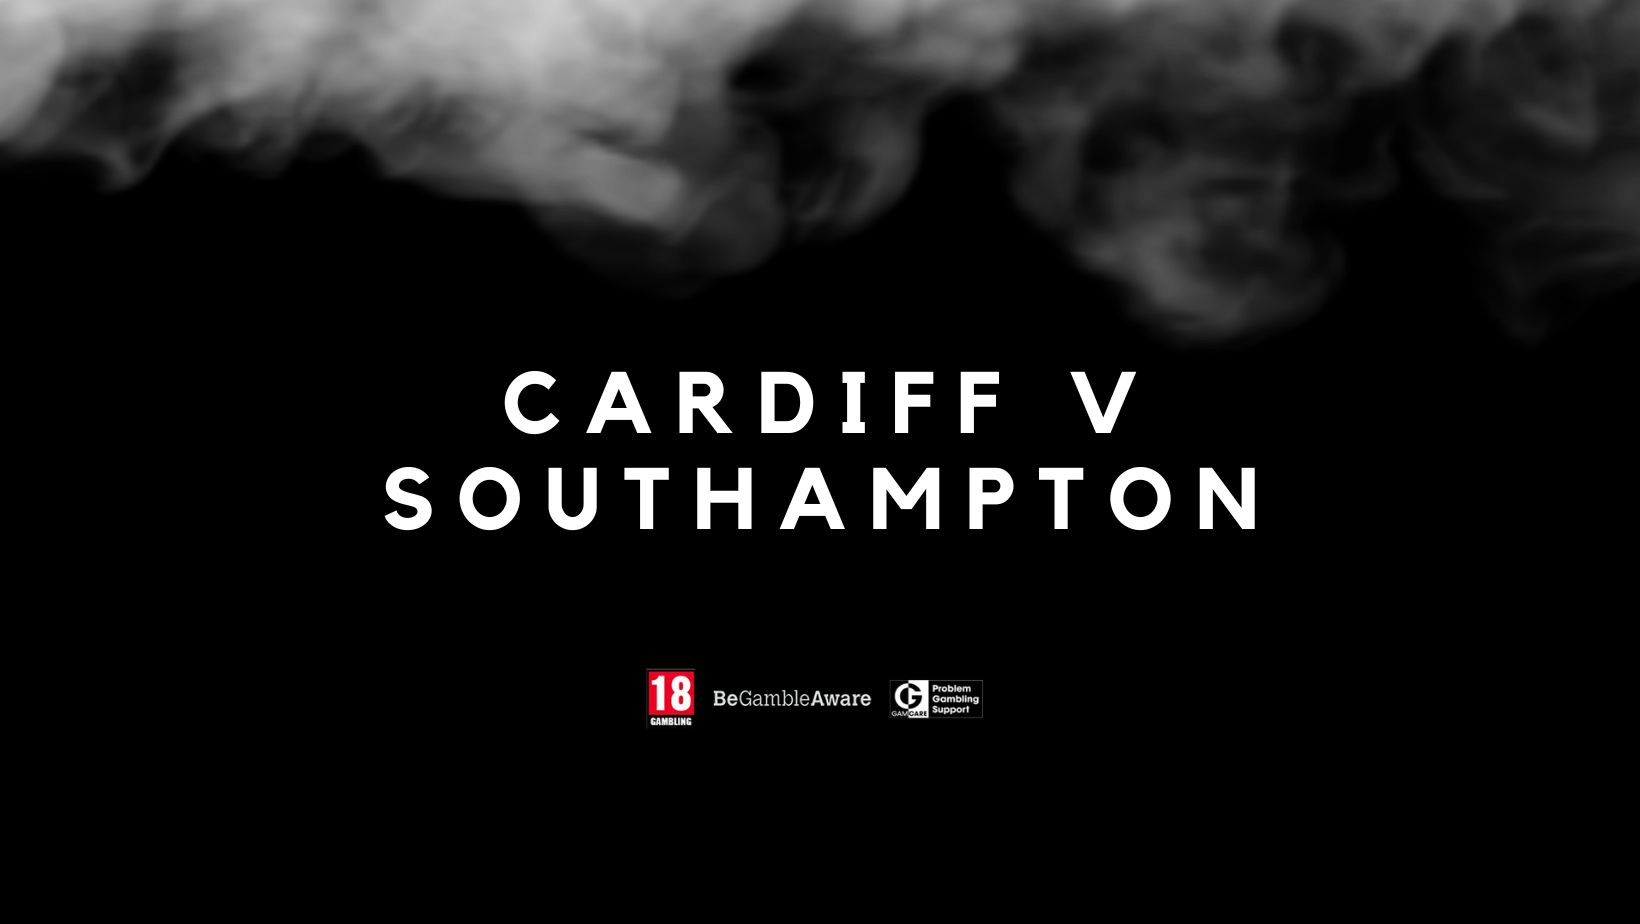 Cardiff v Southampton live streaming – where to watch on TV